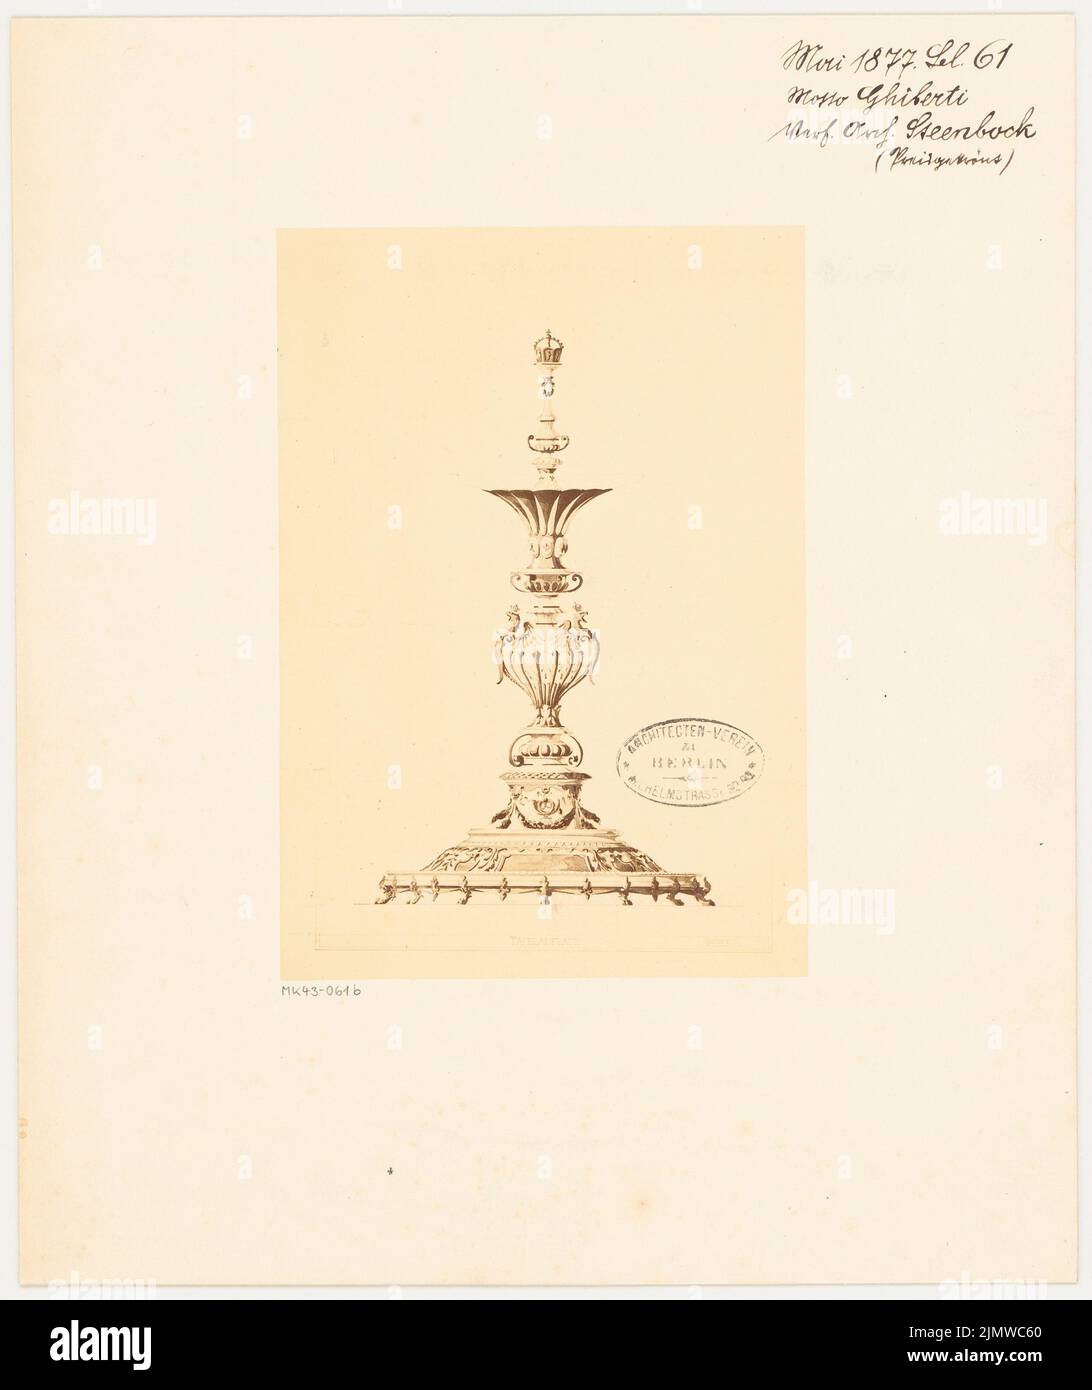 Steenbock Ernst (1850-1878), table attachment. Monthly competition May 1877 (05.1877): View. Photo on paper, 33.8 x 28.4 cm (including scan edges) Steenbock Ernst  (1850-1878): Tafelaufsatz. Monatskonkurrenz Mai 1877 Stock Photo